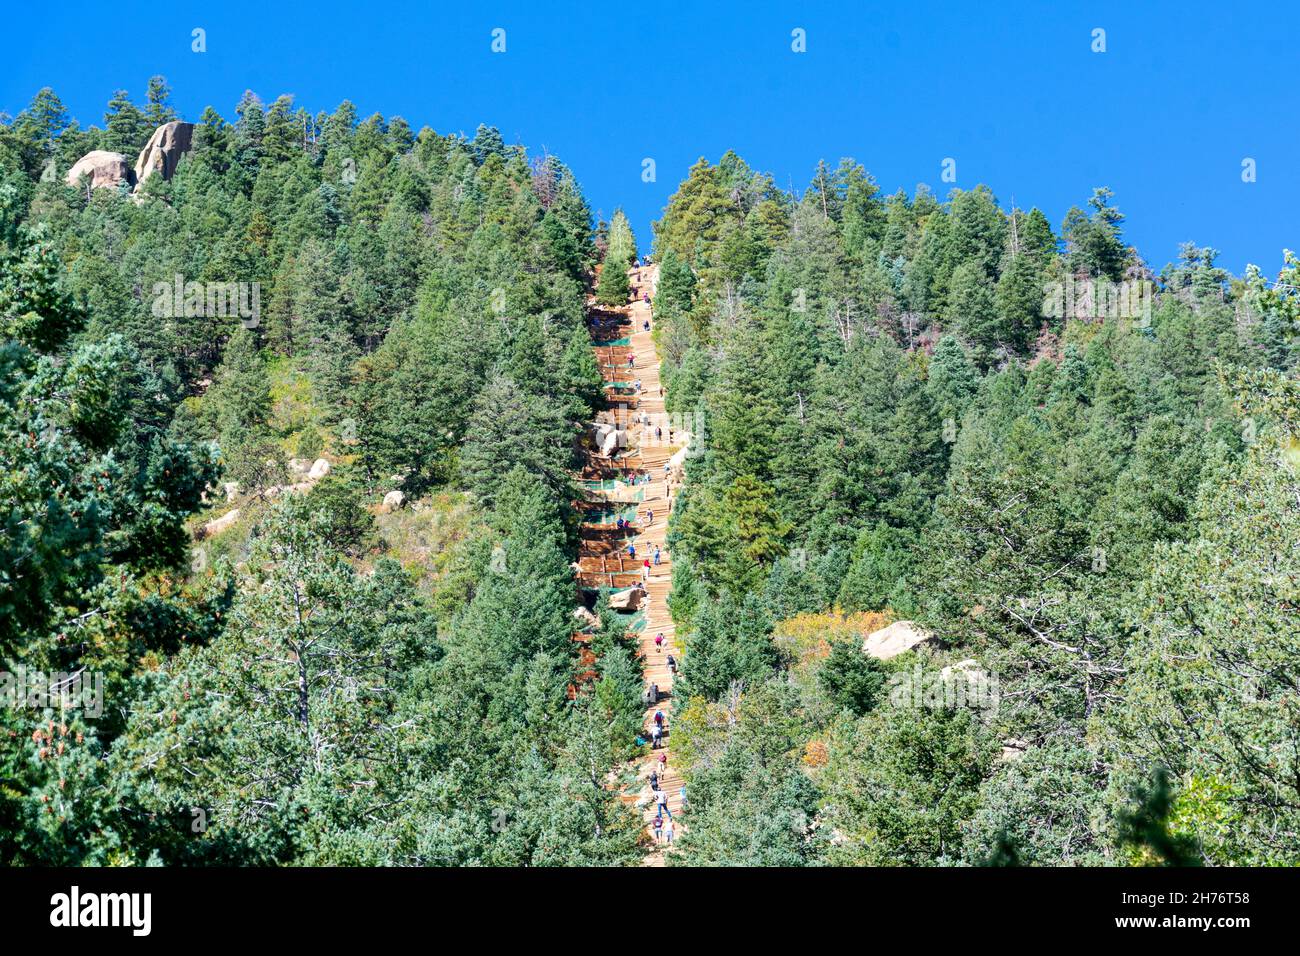 Manitou Incline hiking trail ascends on the east slope of Rocky Mountain Stock Photo